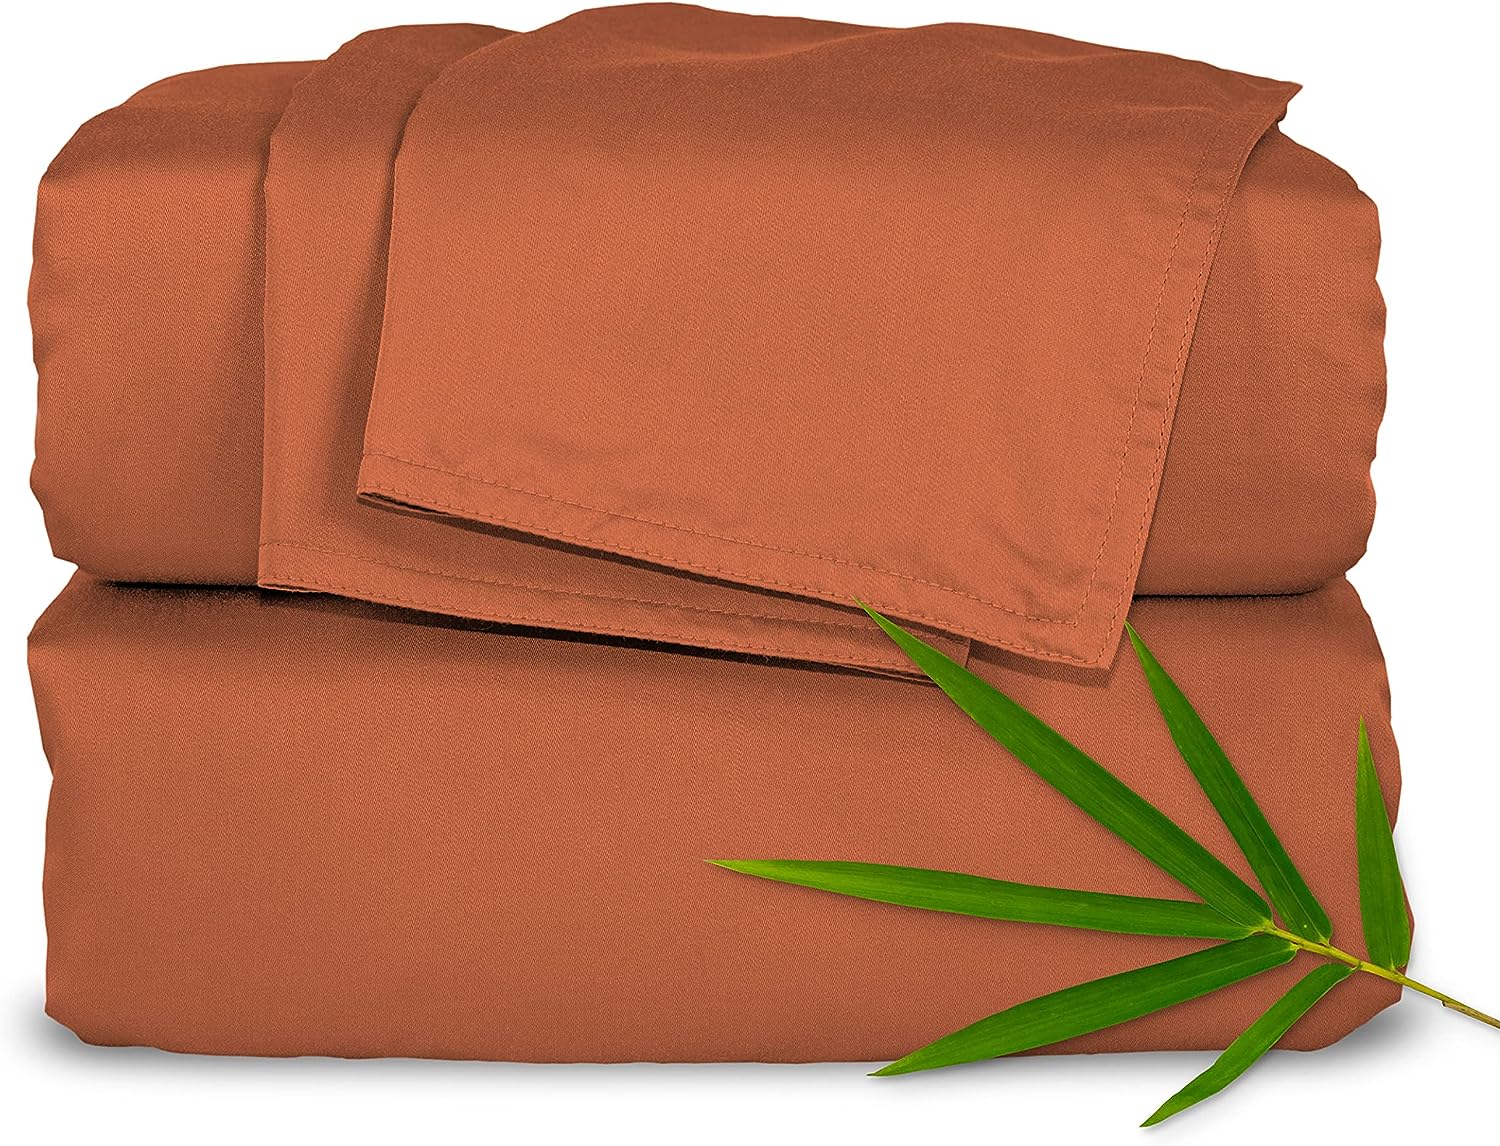 Pure Bamboo Sheets King Bed Sheet Set, Genuine 100% Organic Bamboo Viscose, Luxuriously Soft & Cooling, Double Stitching, 16 Inch Deep Pockets, Lifetime Quality Promise (King, Terracotta)